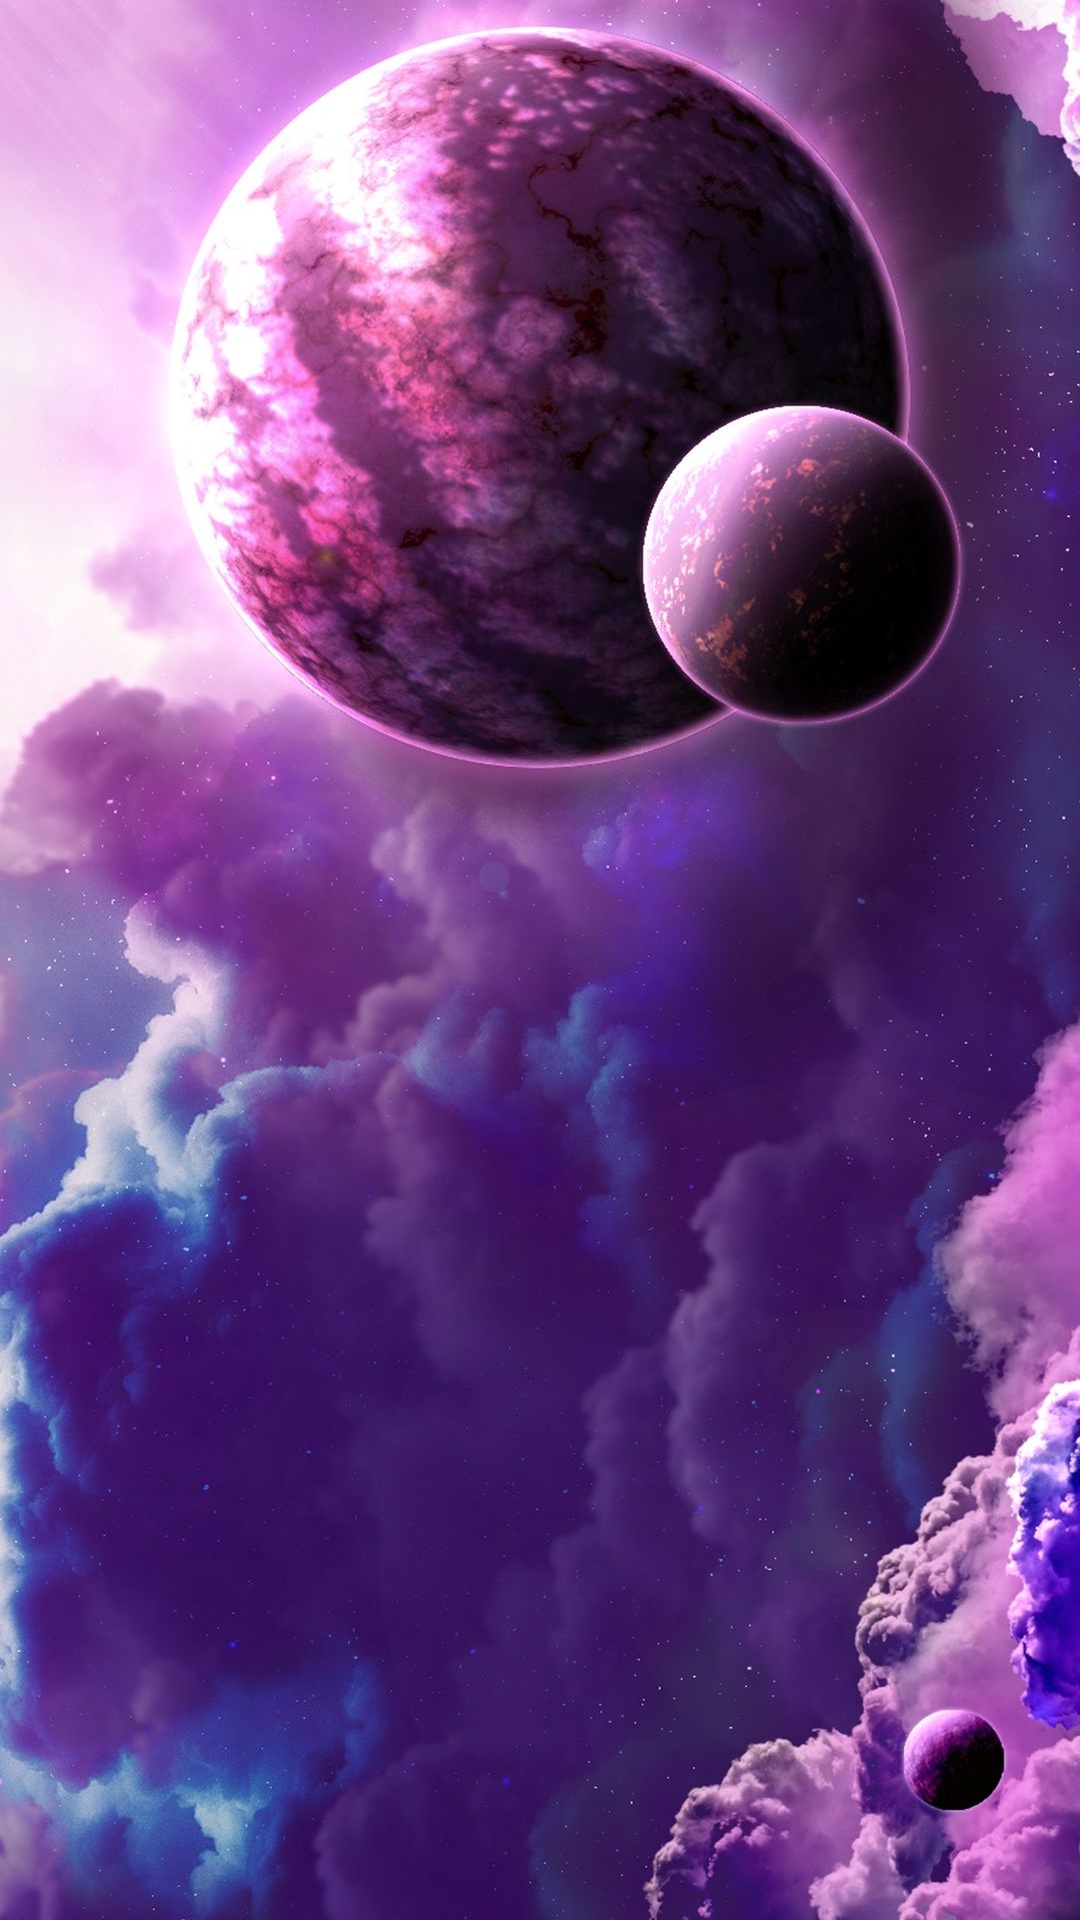 Clouds Plnets Aesthetic, Planet, Universe, Star, Space. Wallpaper in 1080x1920 Resolution